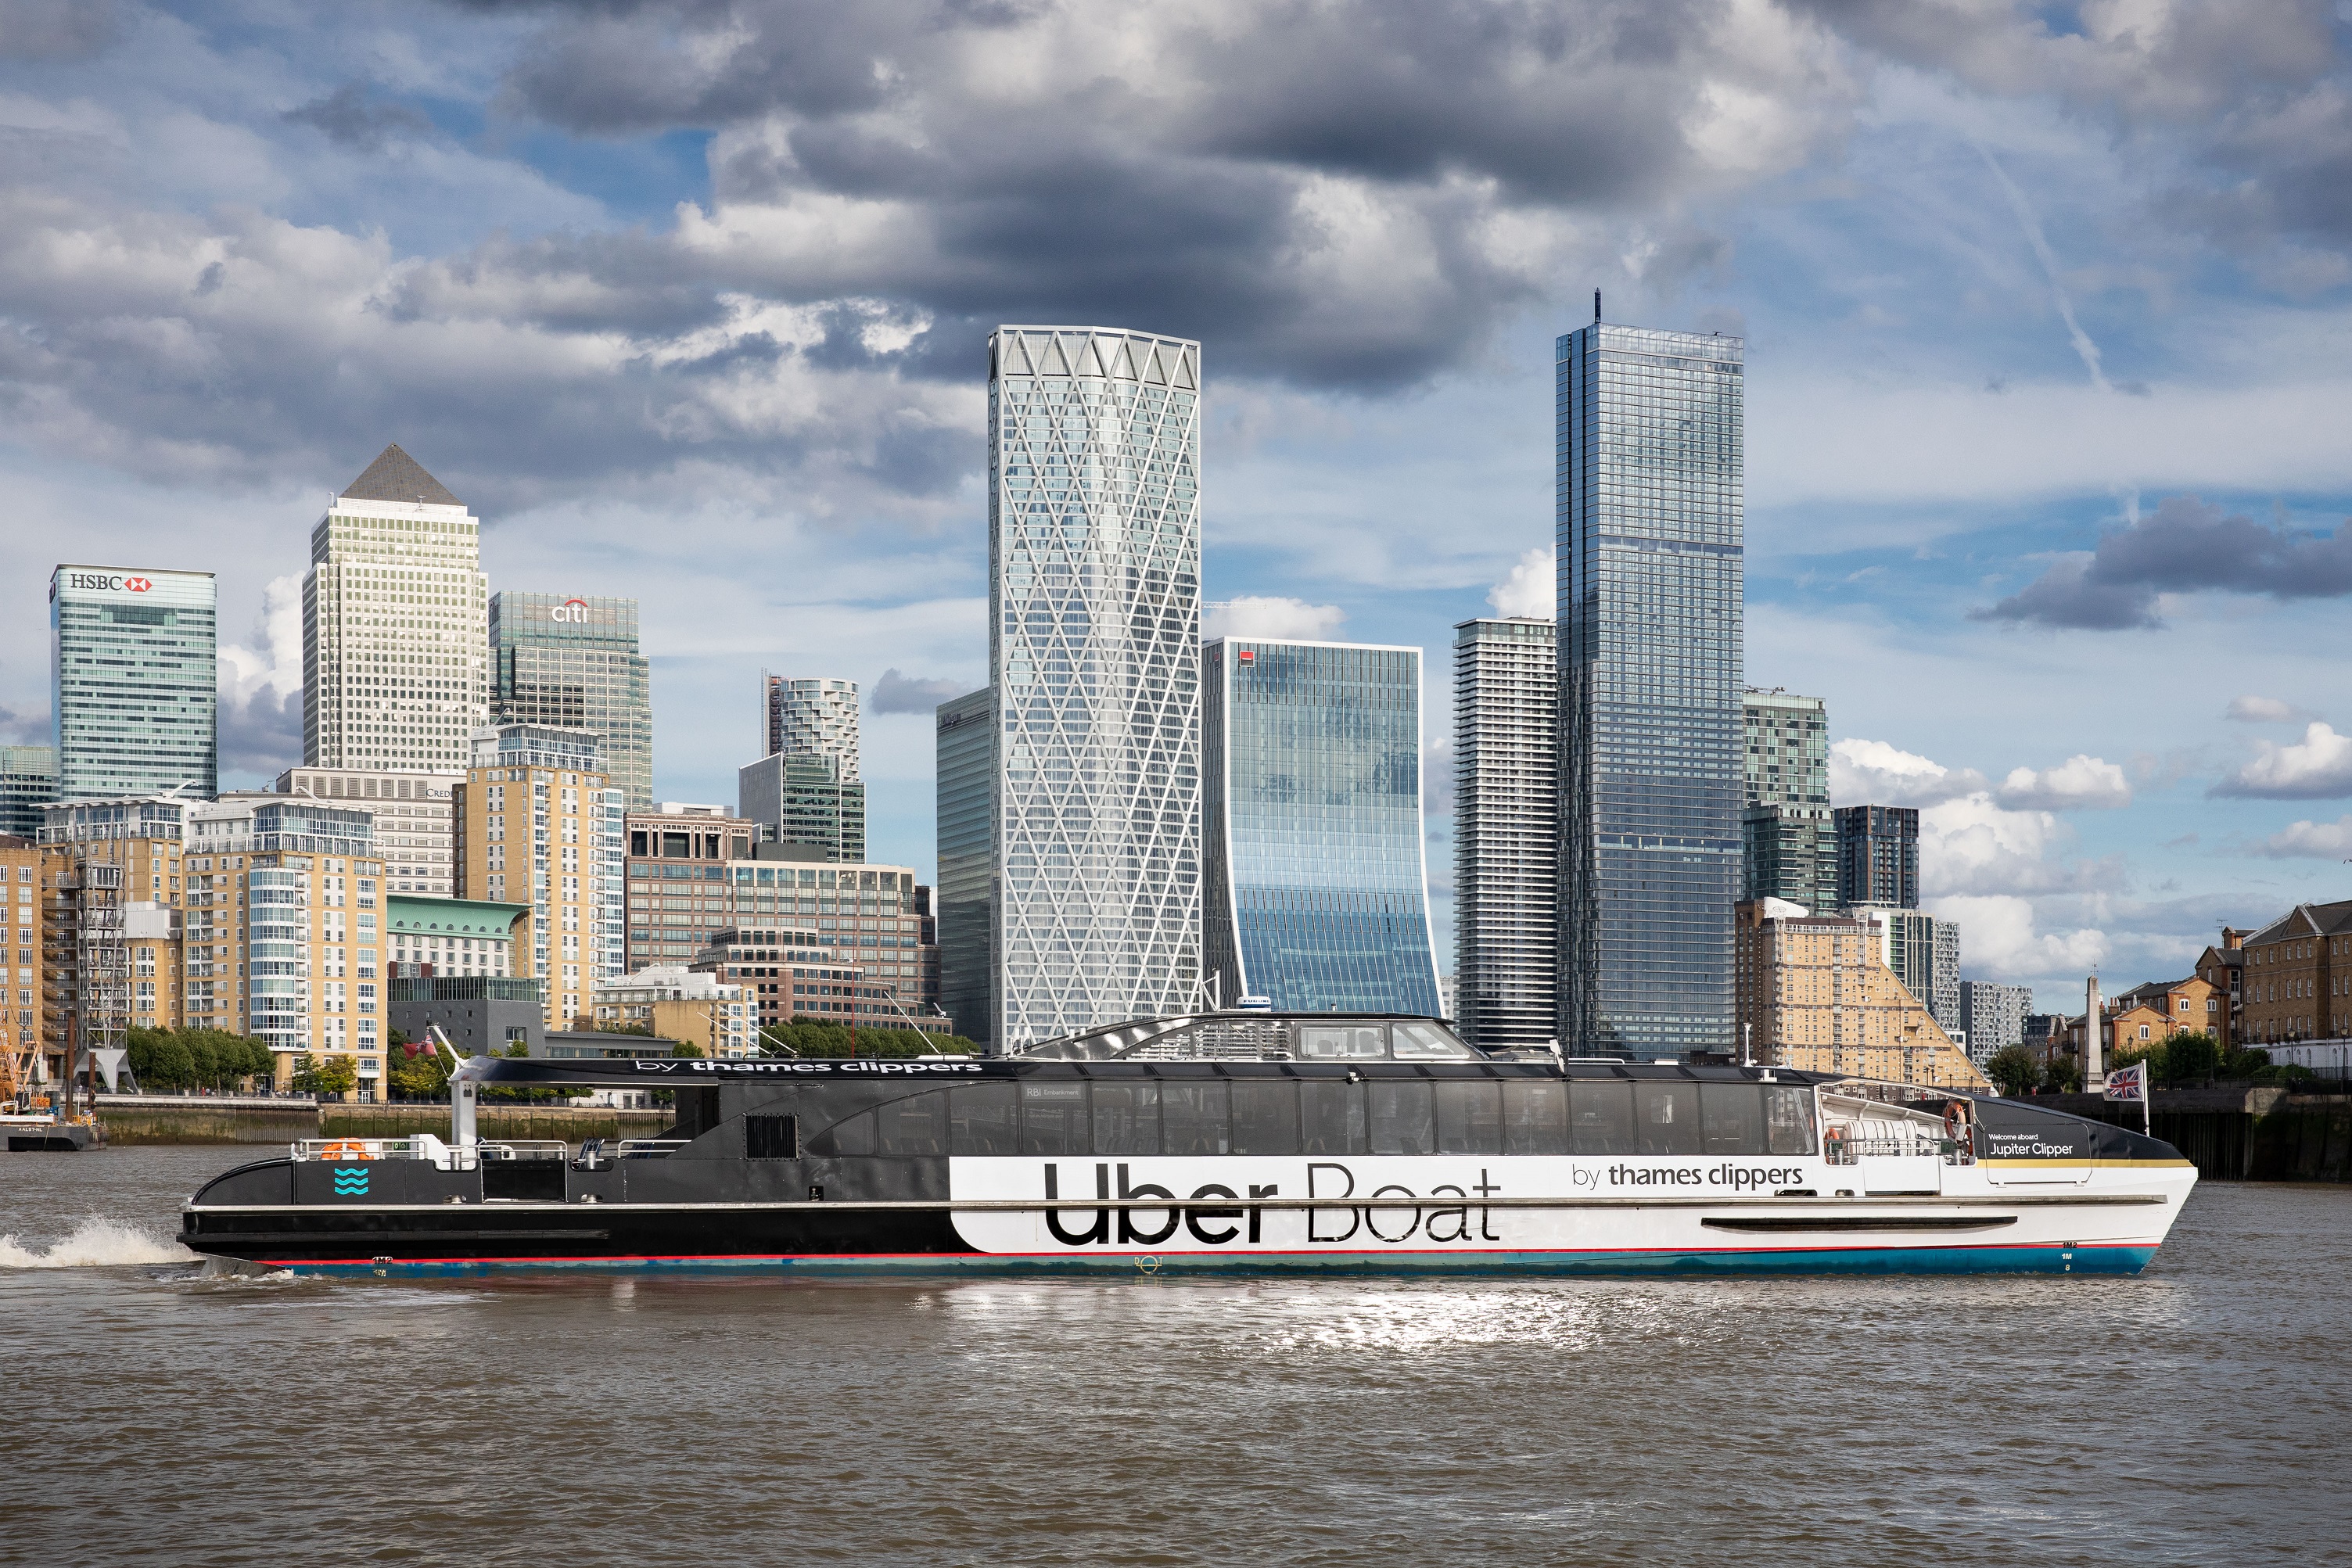 Uber_Boat_by_Thames_Clippers_Canary_Wharf.